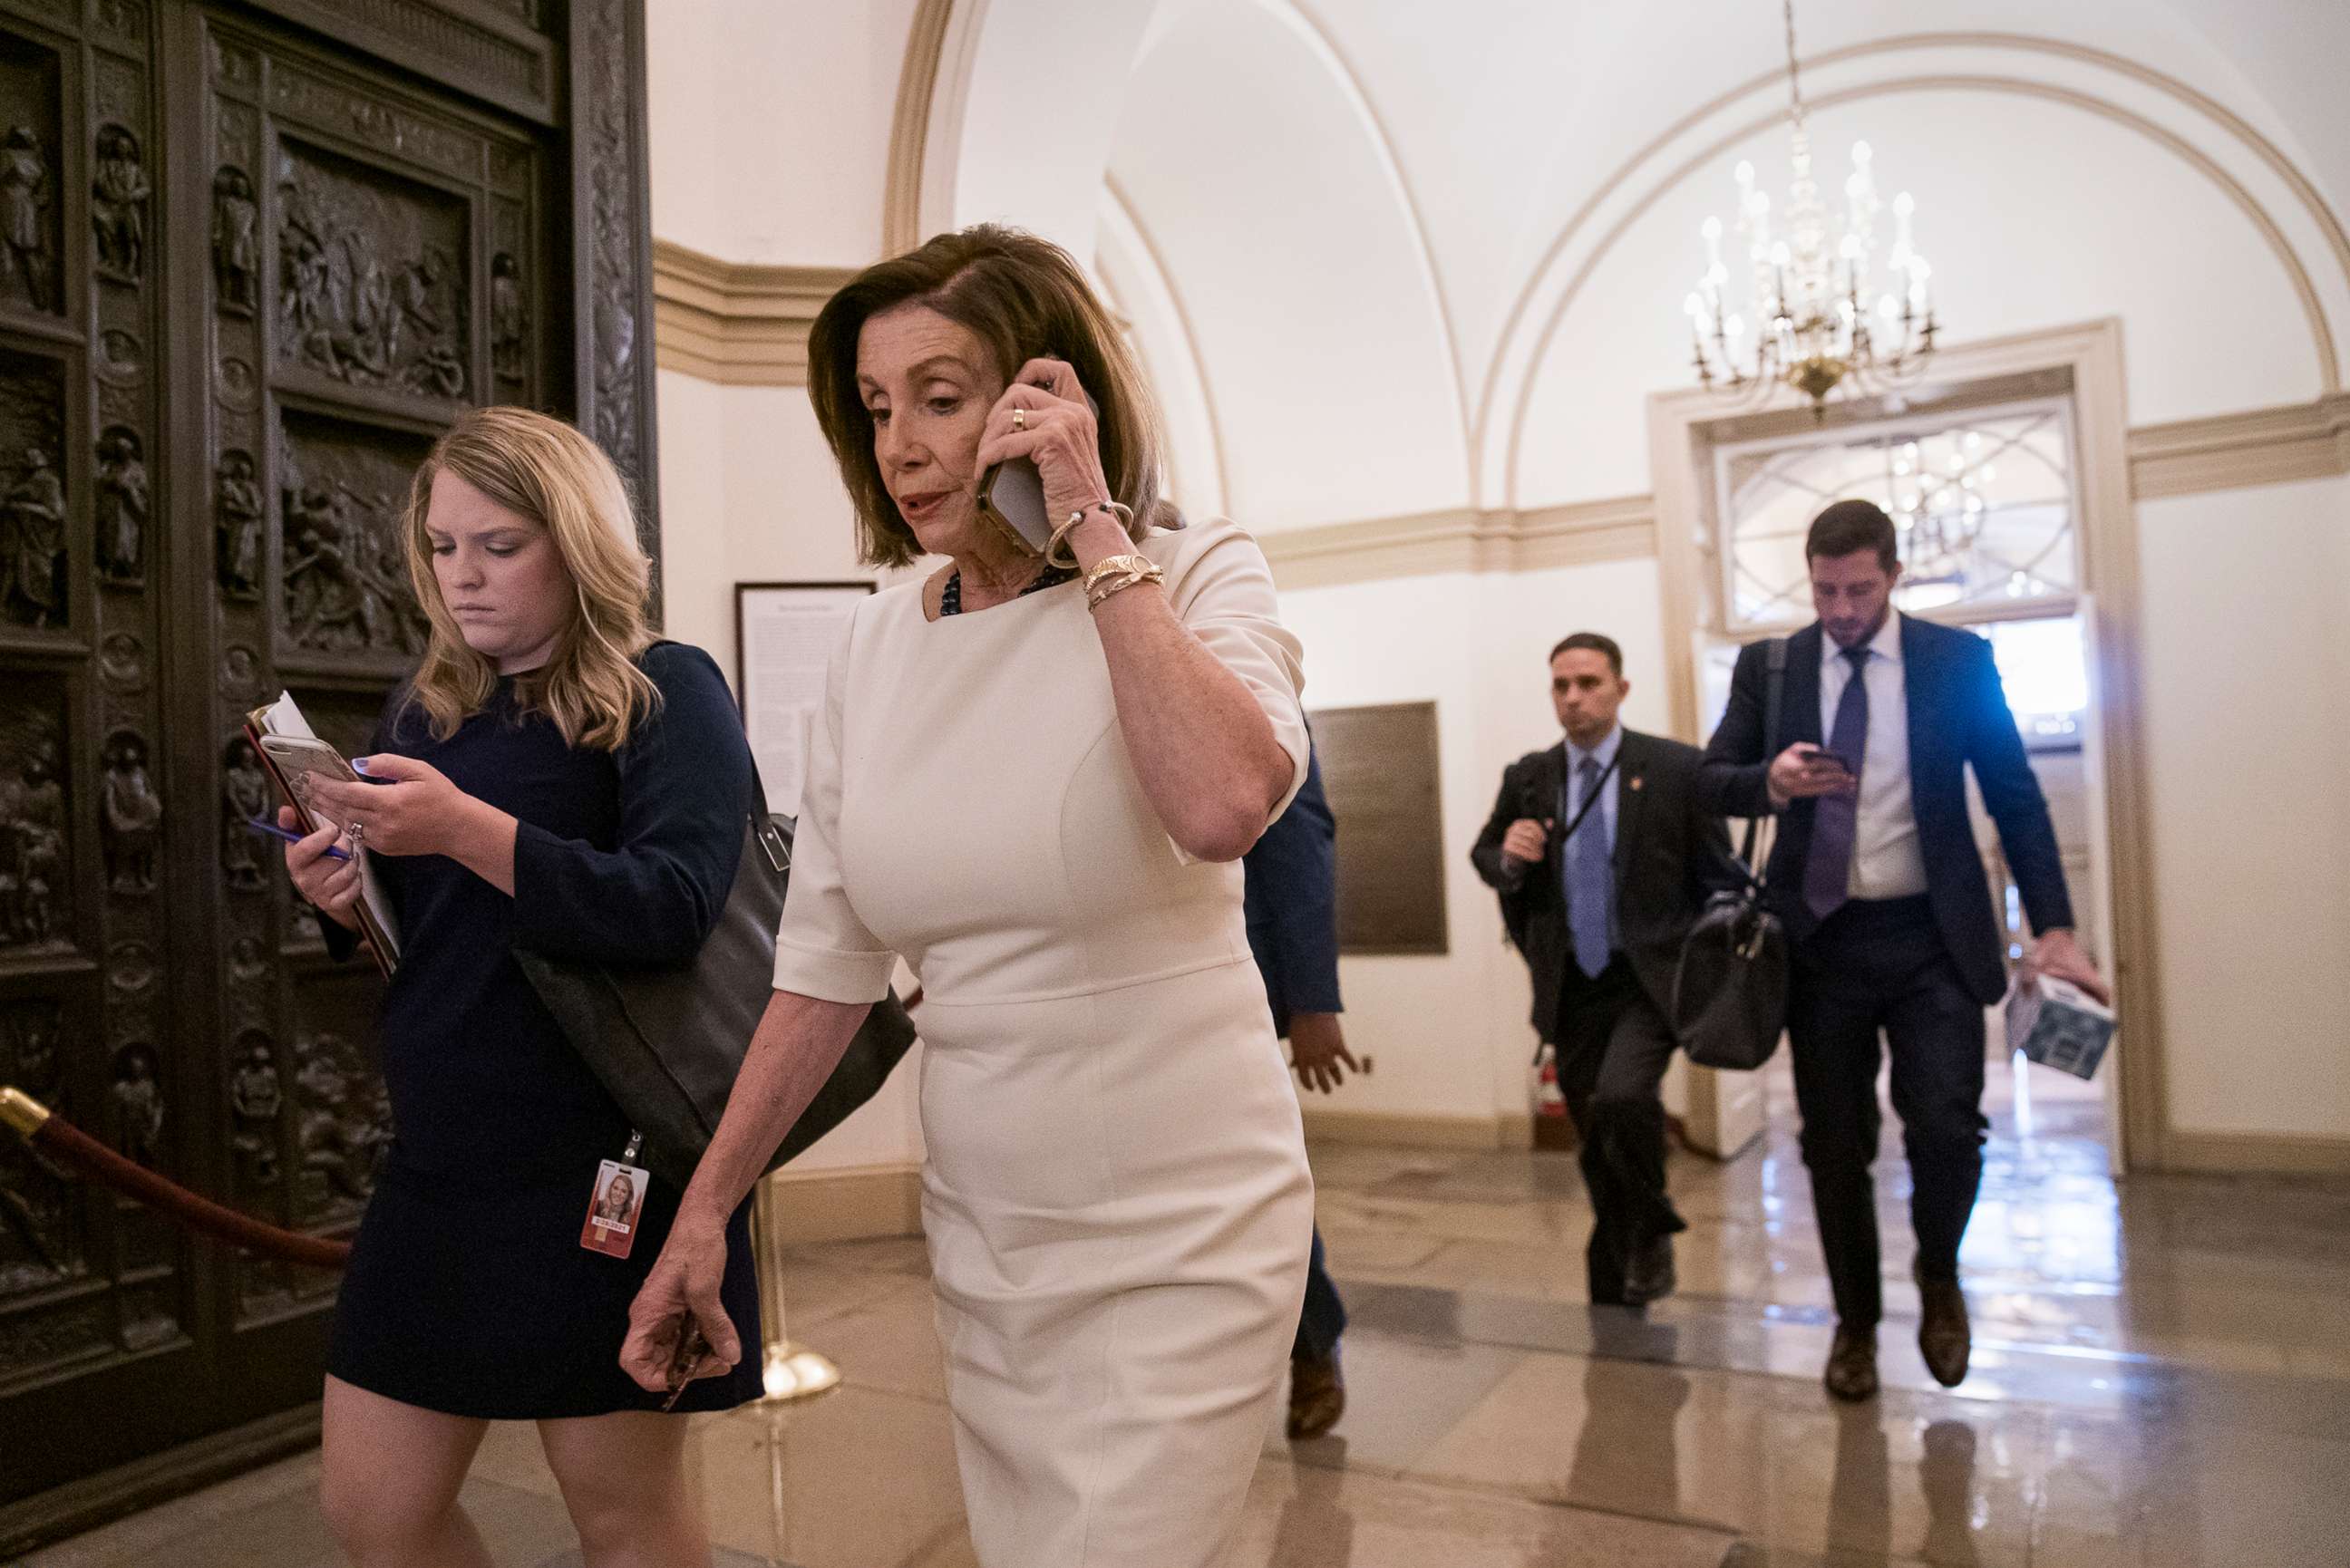 PHOTO: Speaker of the House Nancy Pelosi arrives at the Capitol in Washington, D.C., Sept. 26, 2019, just as Joseph Maguire is set to speak.